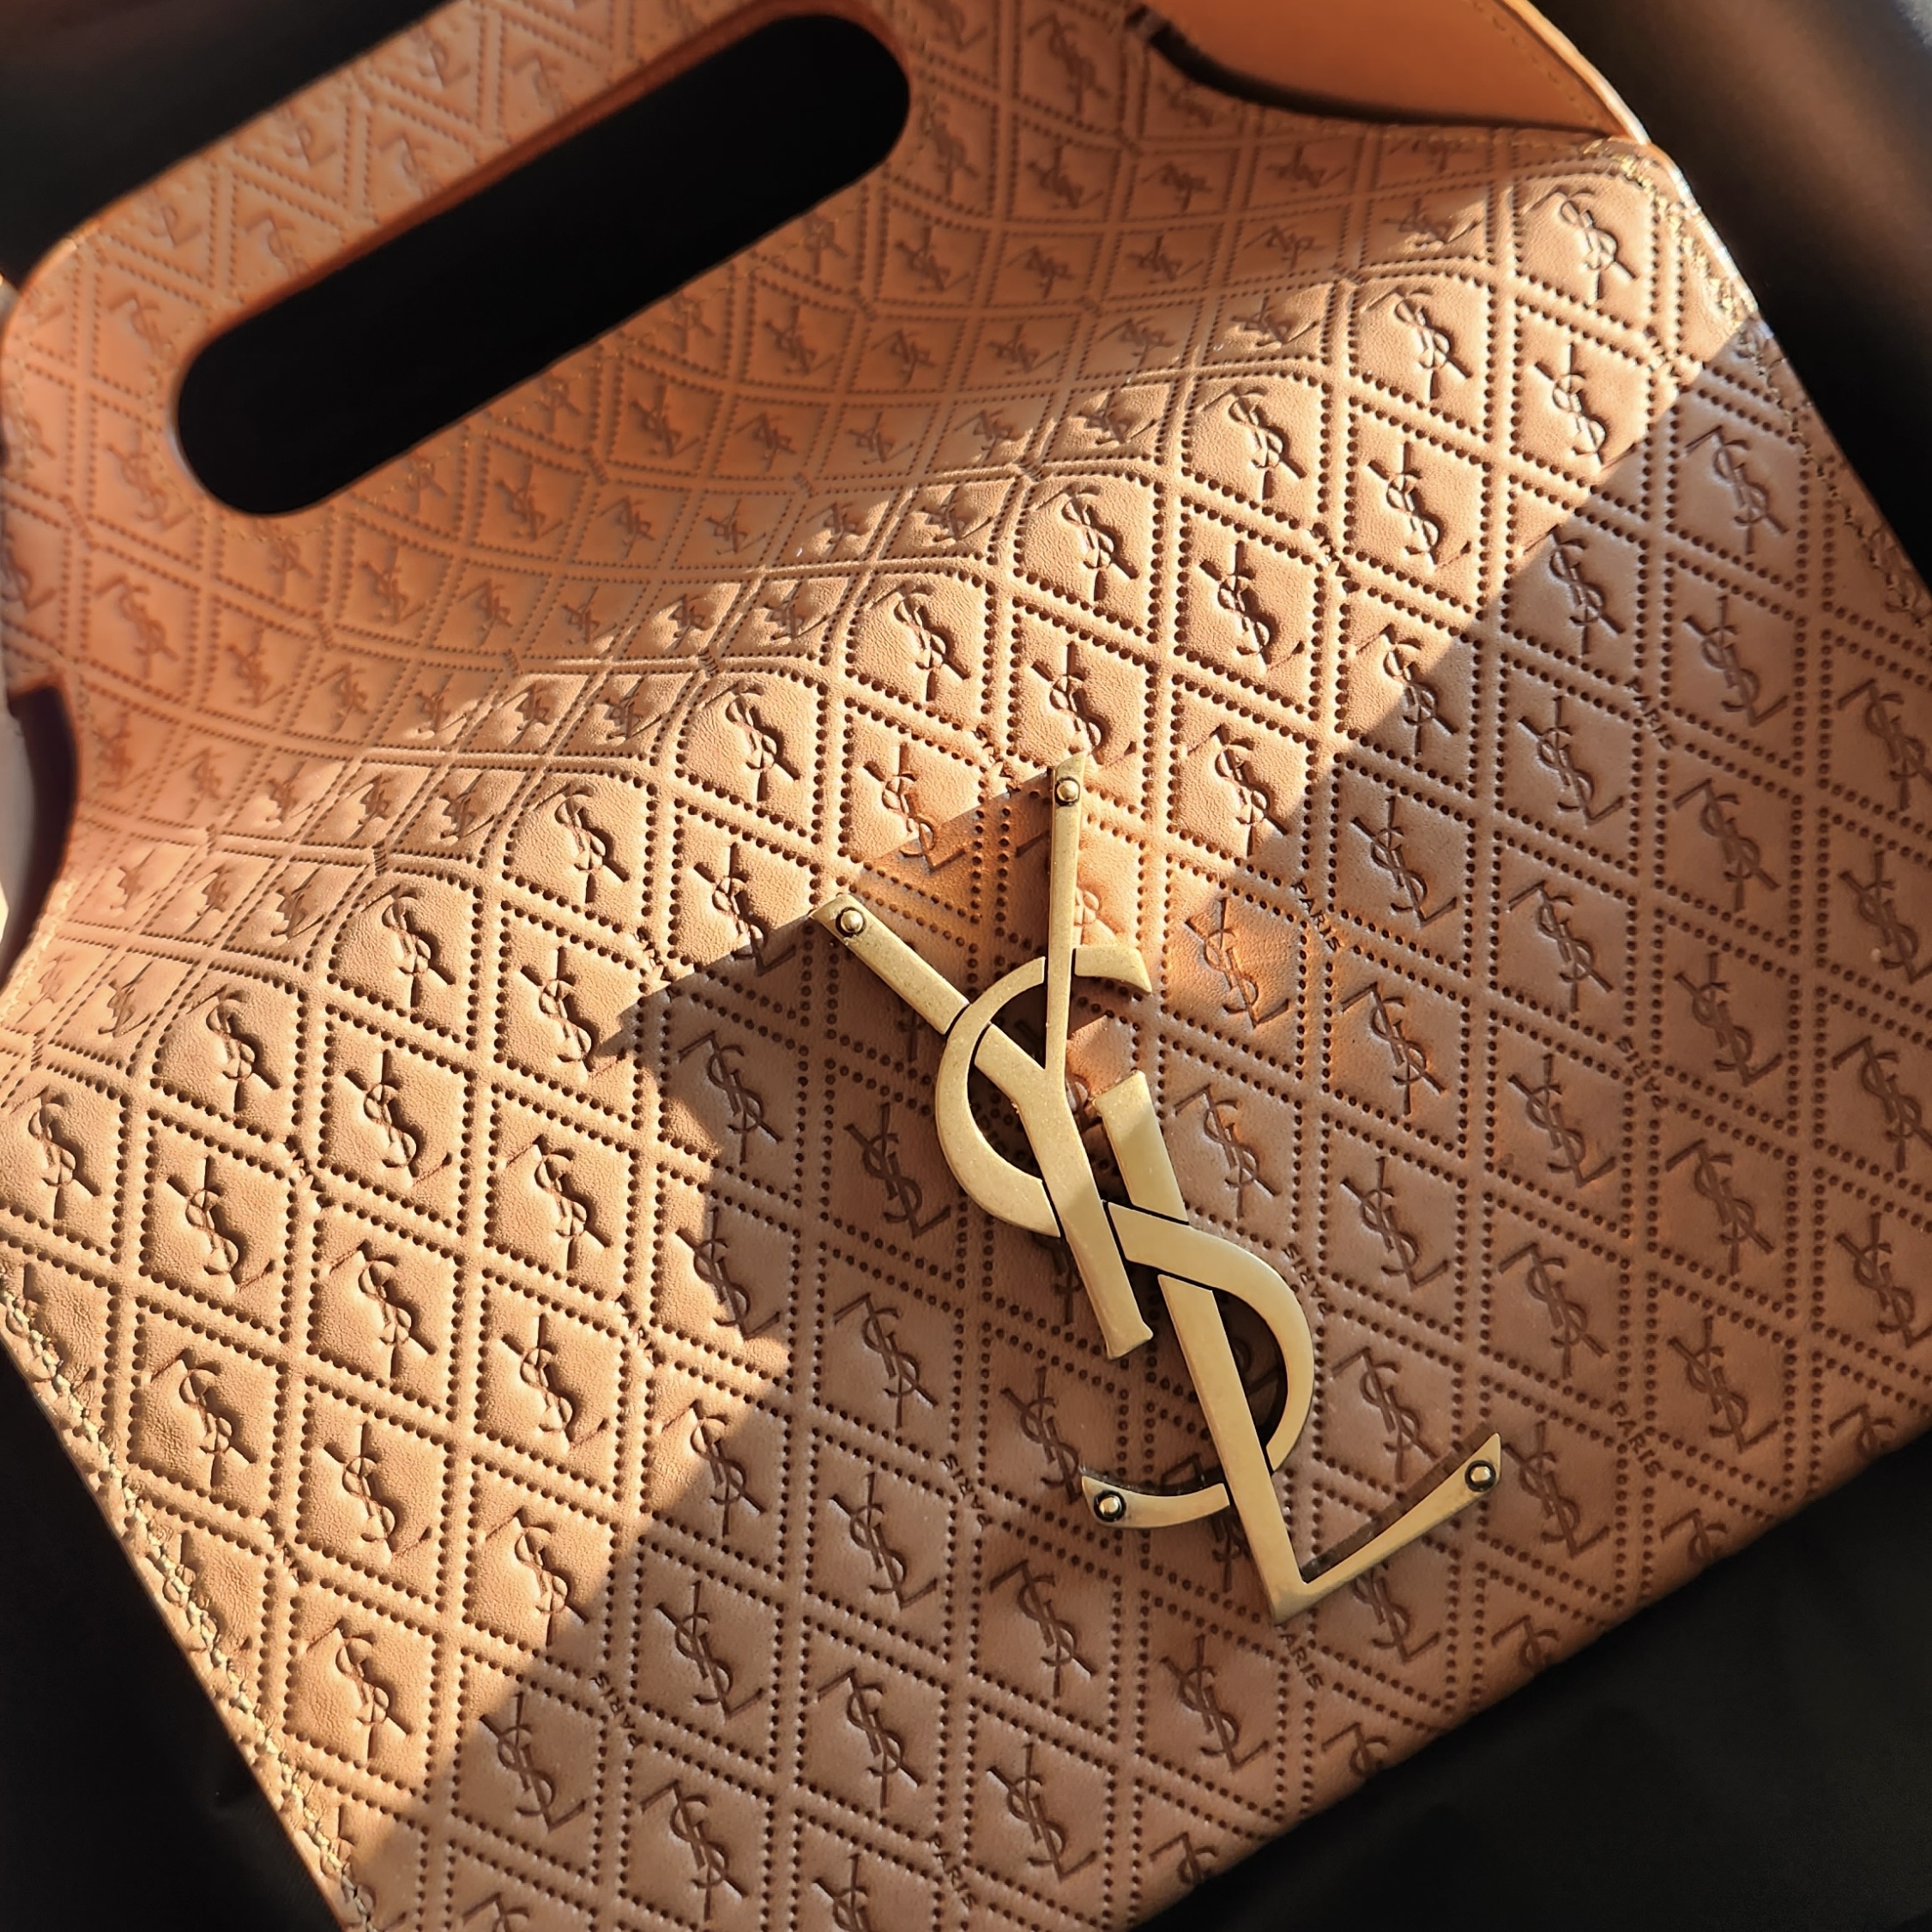 Brand New Saint Laurent and Louis Vuitton Bags are Celebs' Top Picks This  Week - PurseBlog